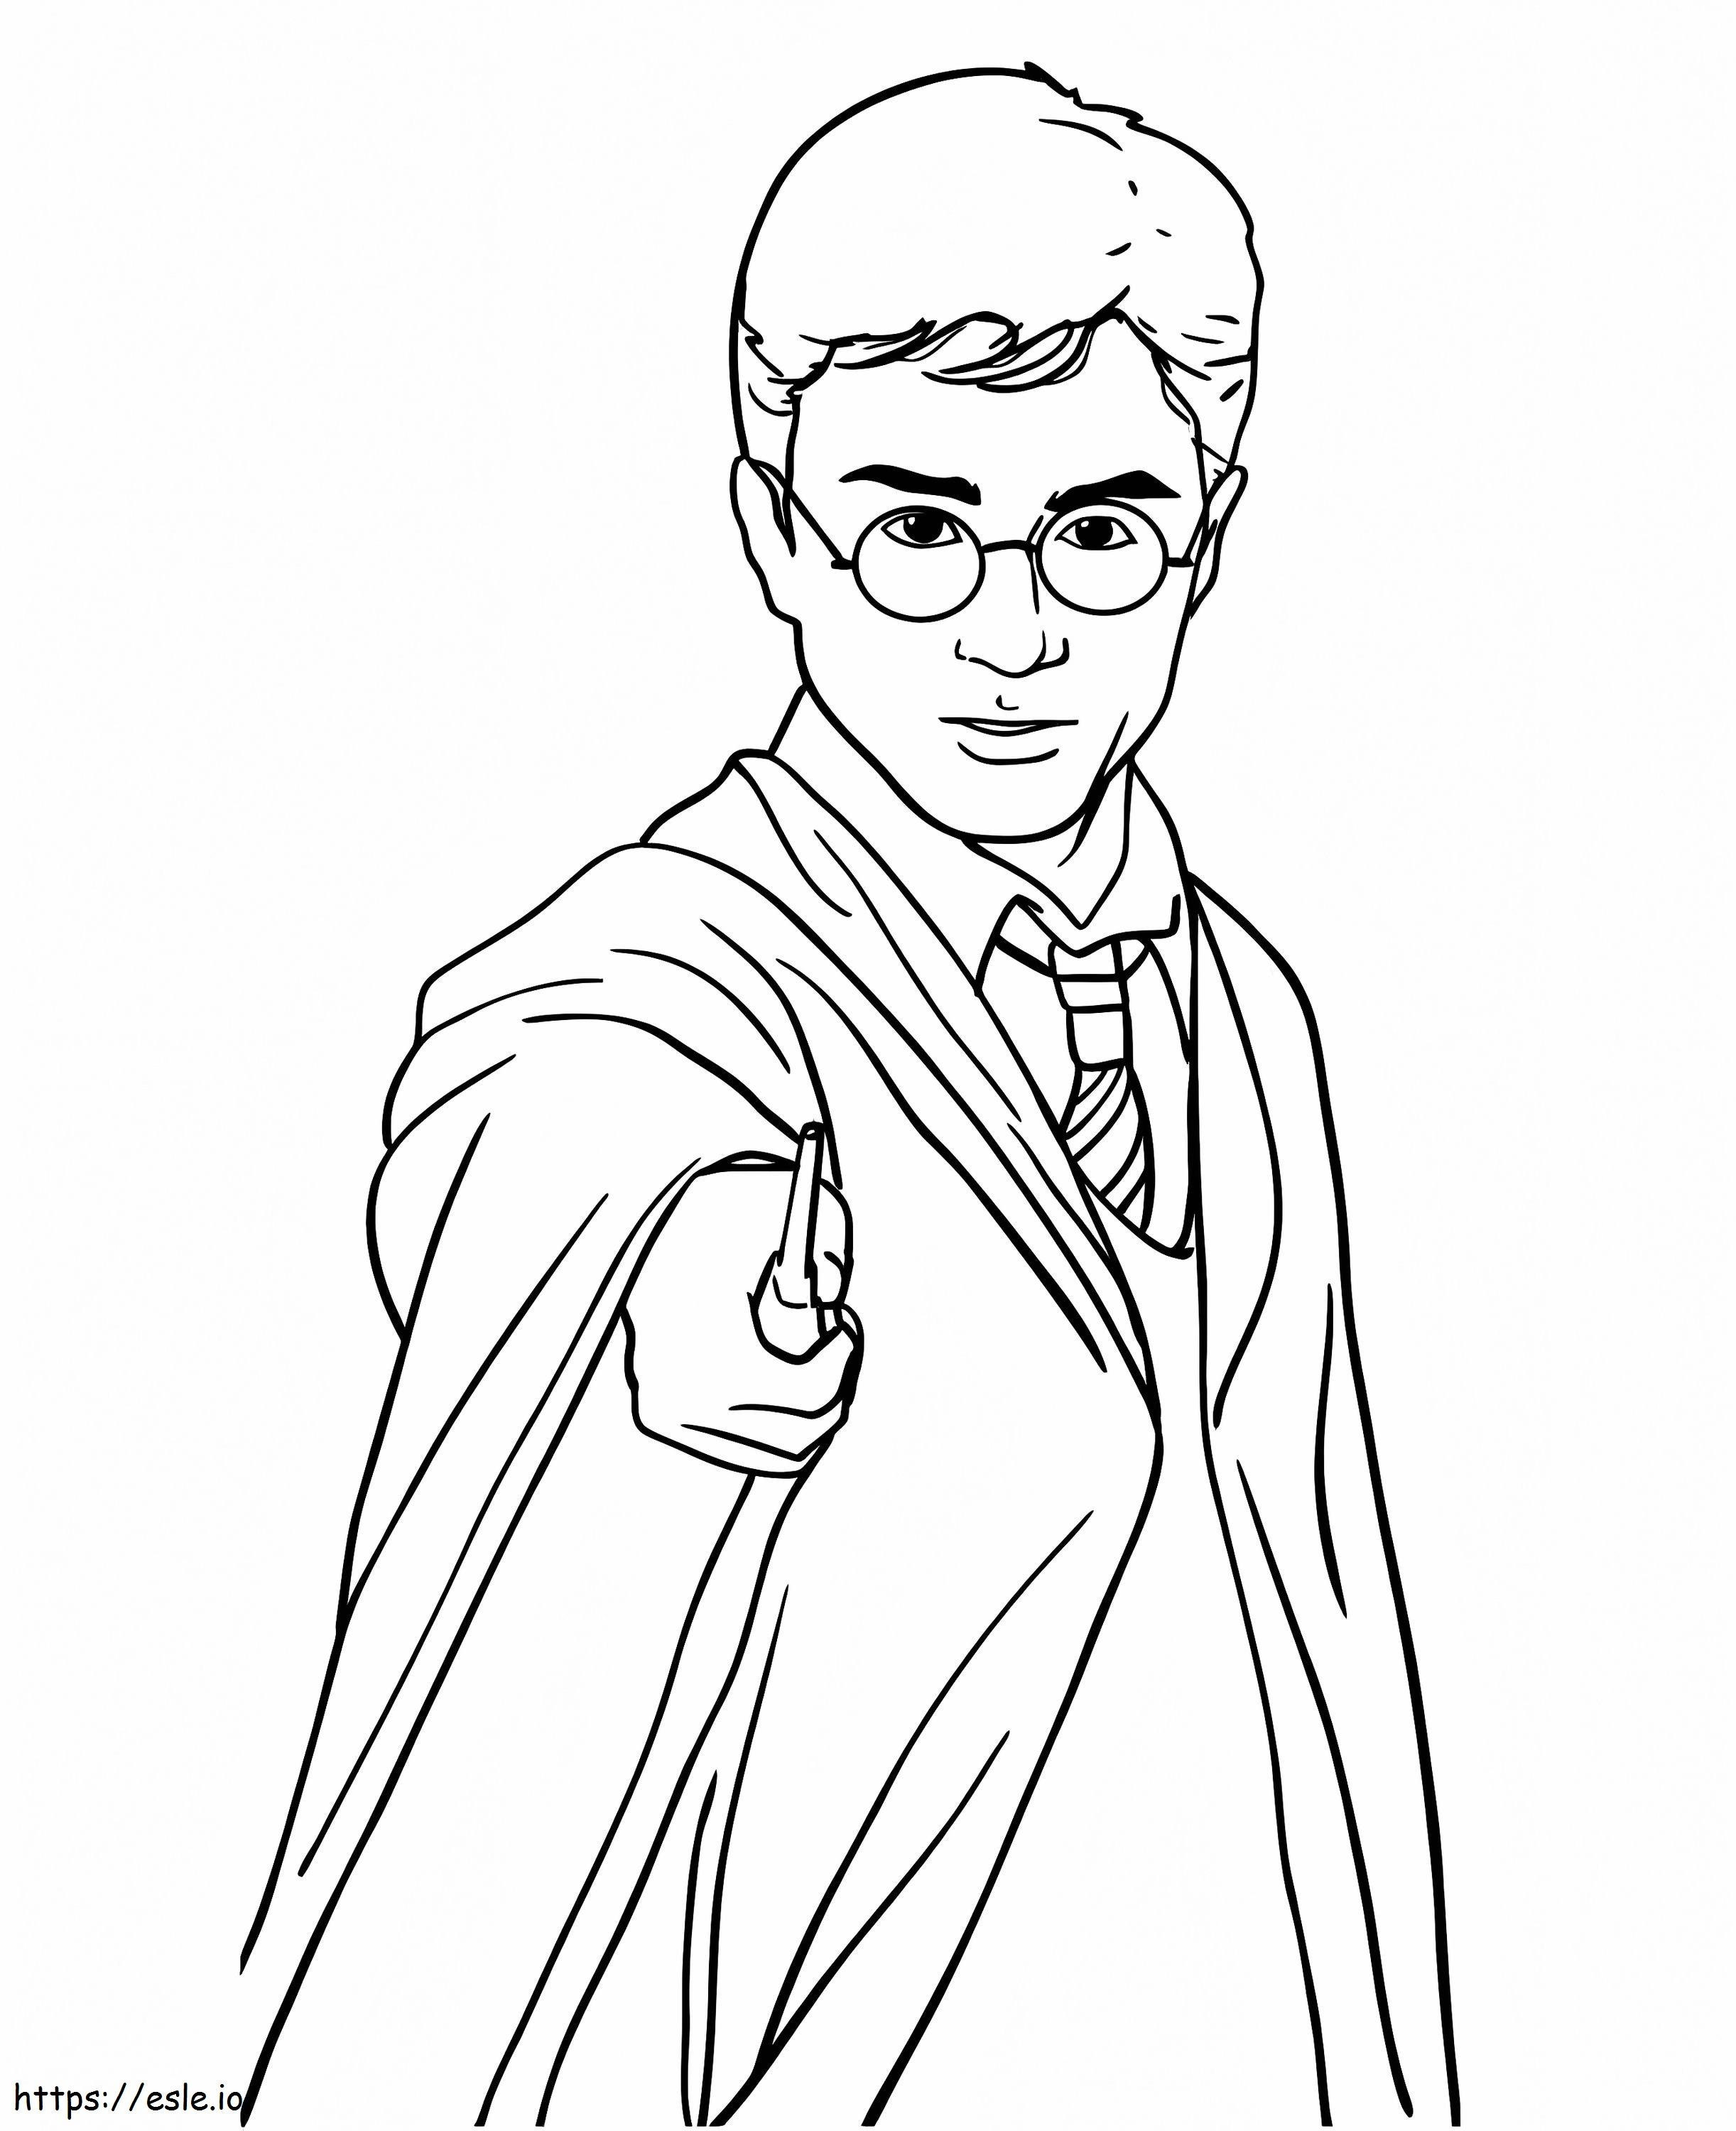 Great Harry Potter Holding A Magic Wand coloring page